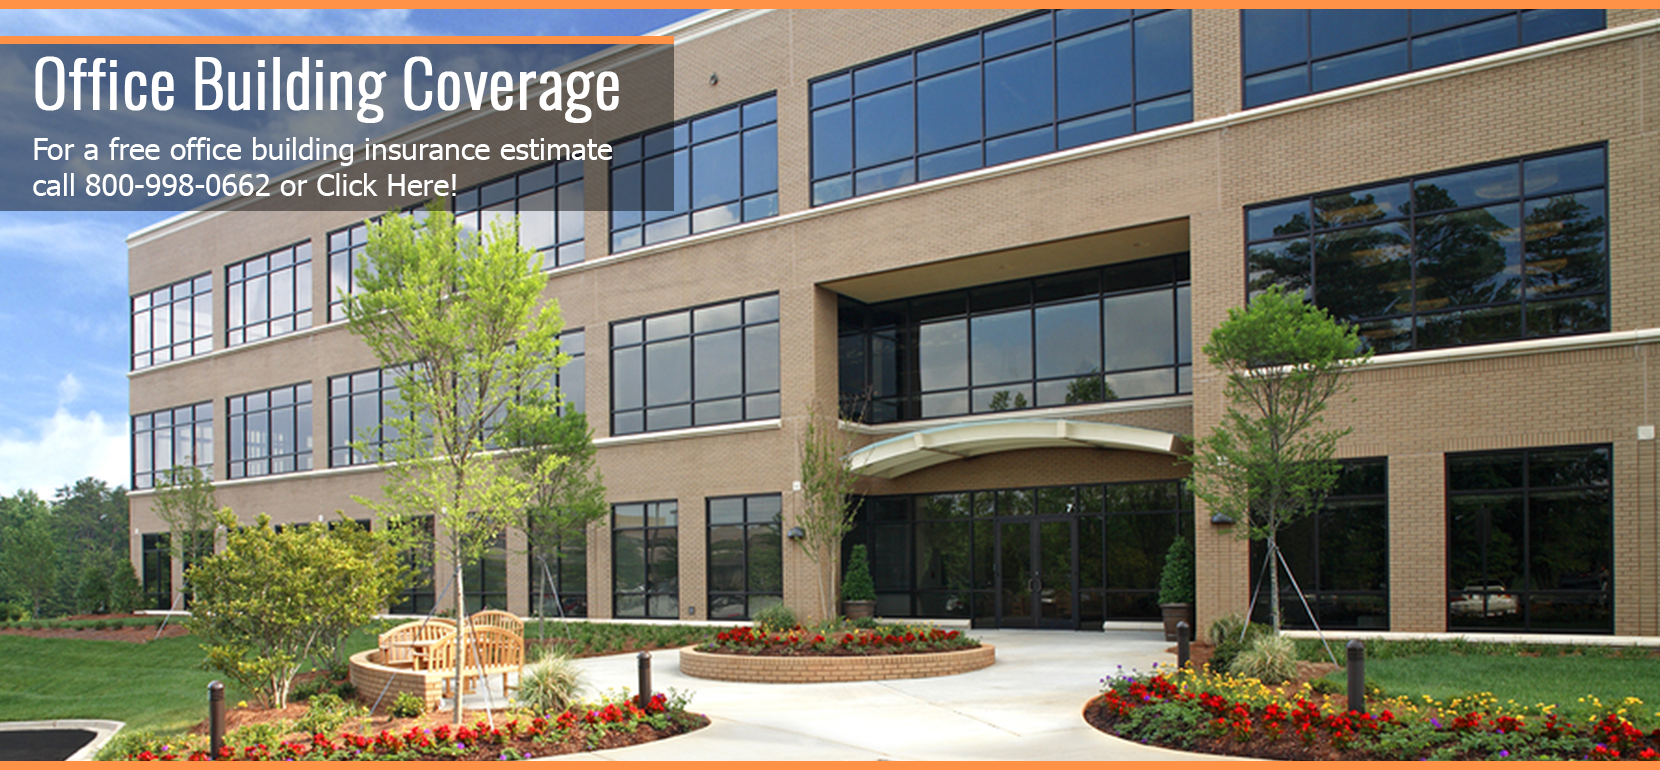 Office Building Coverage